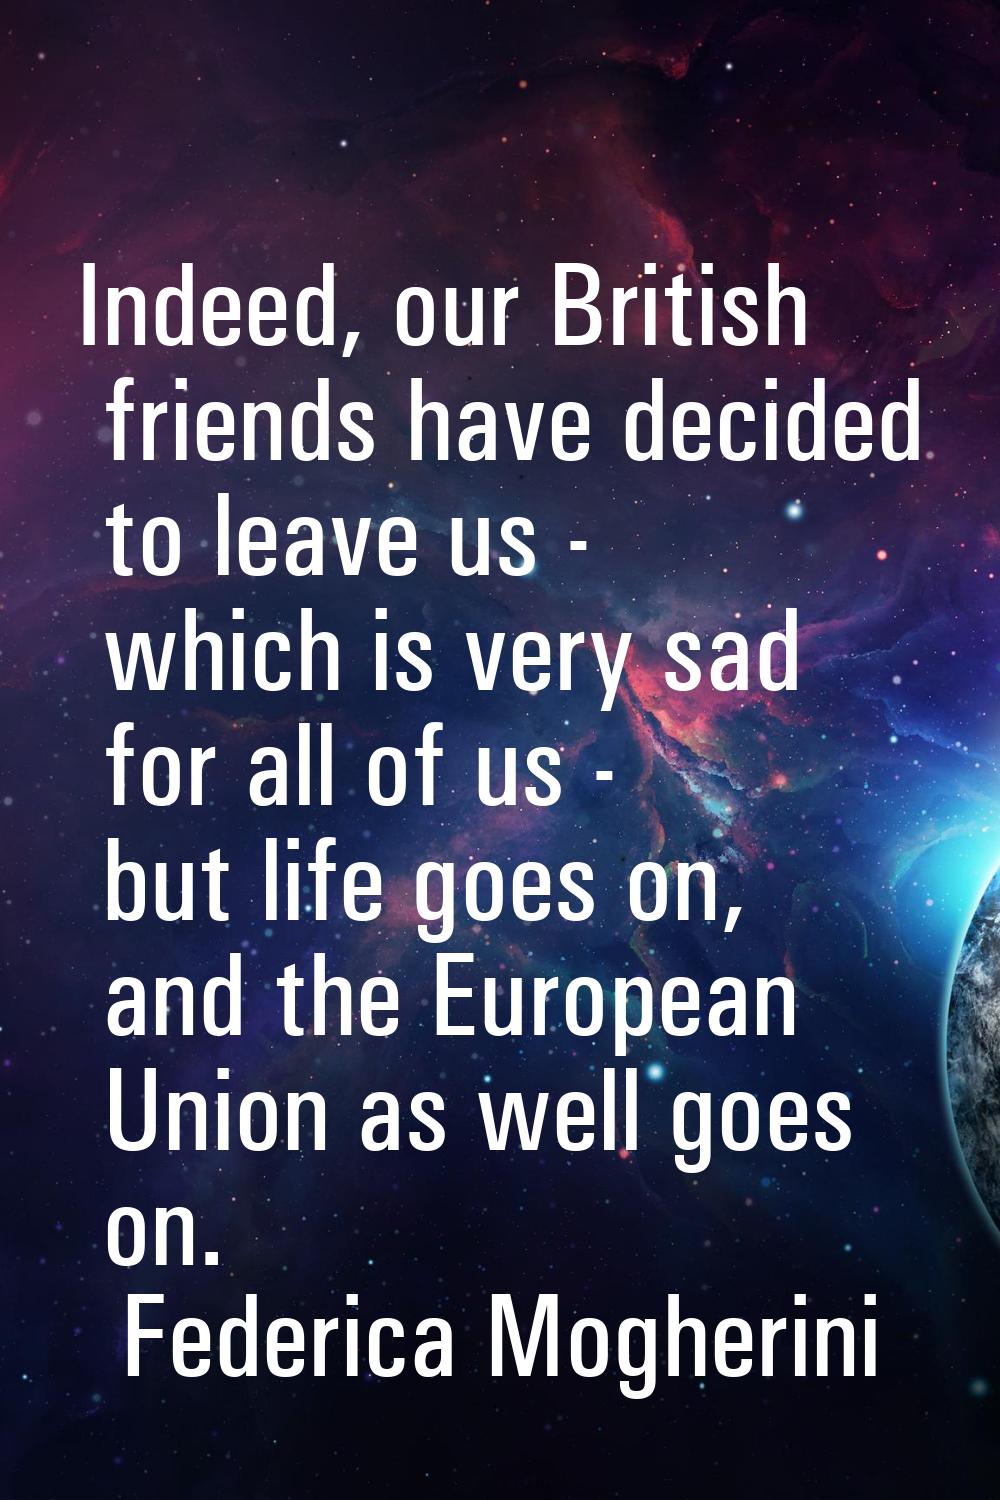 Indeed, our British friends have decided to leave us - which is very sad for all of us - but life g